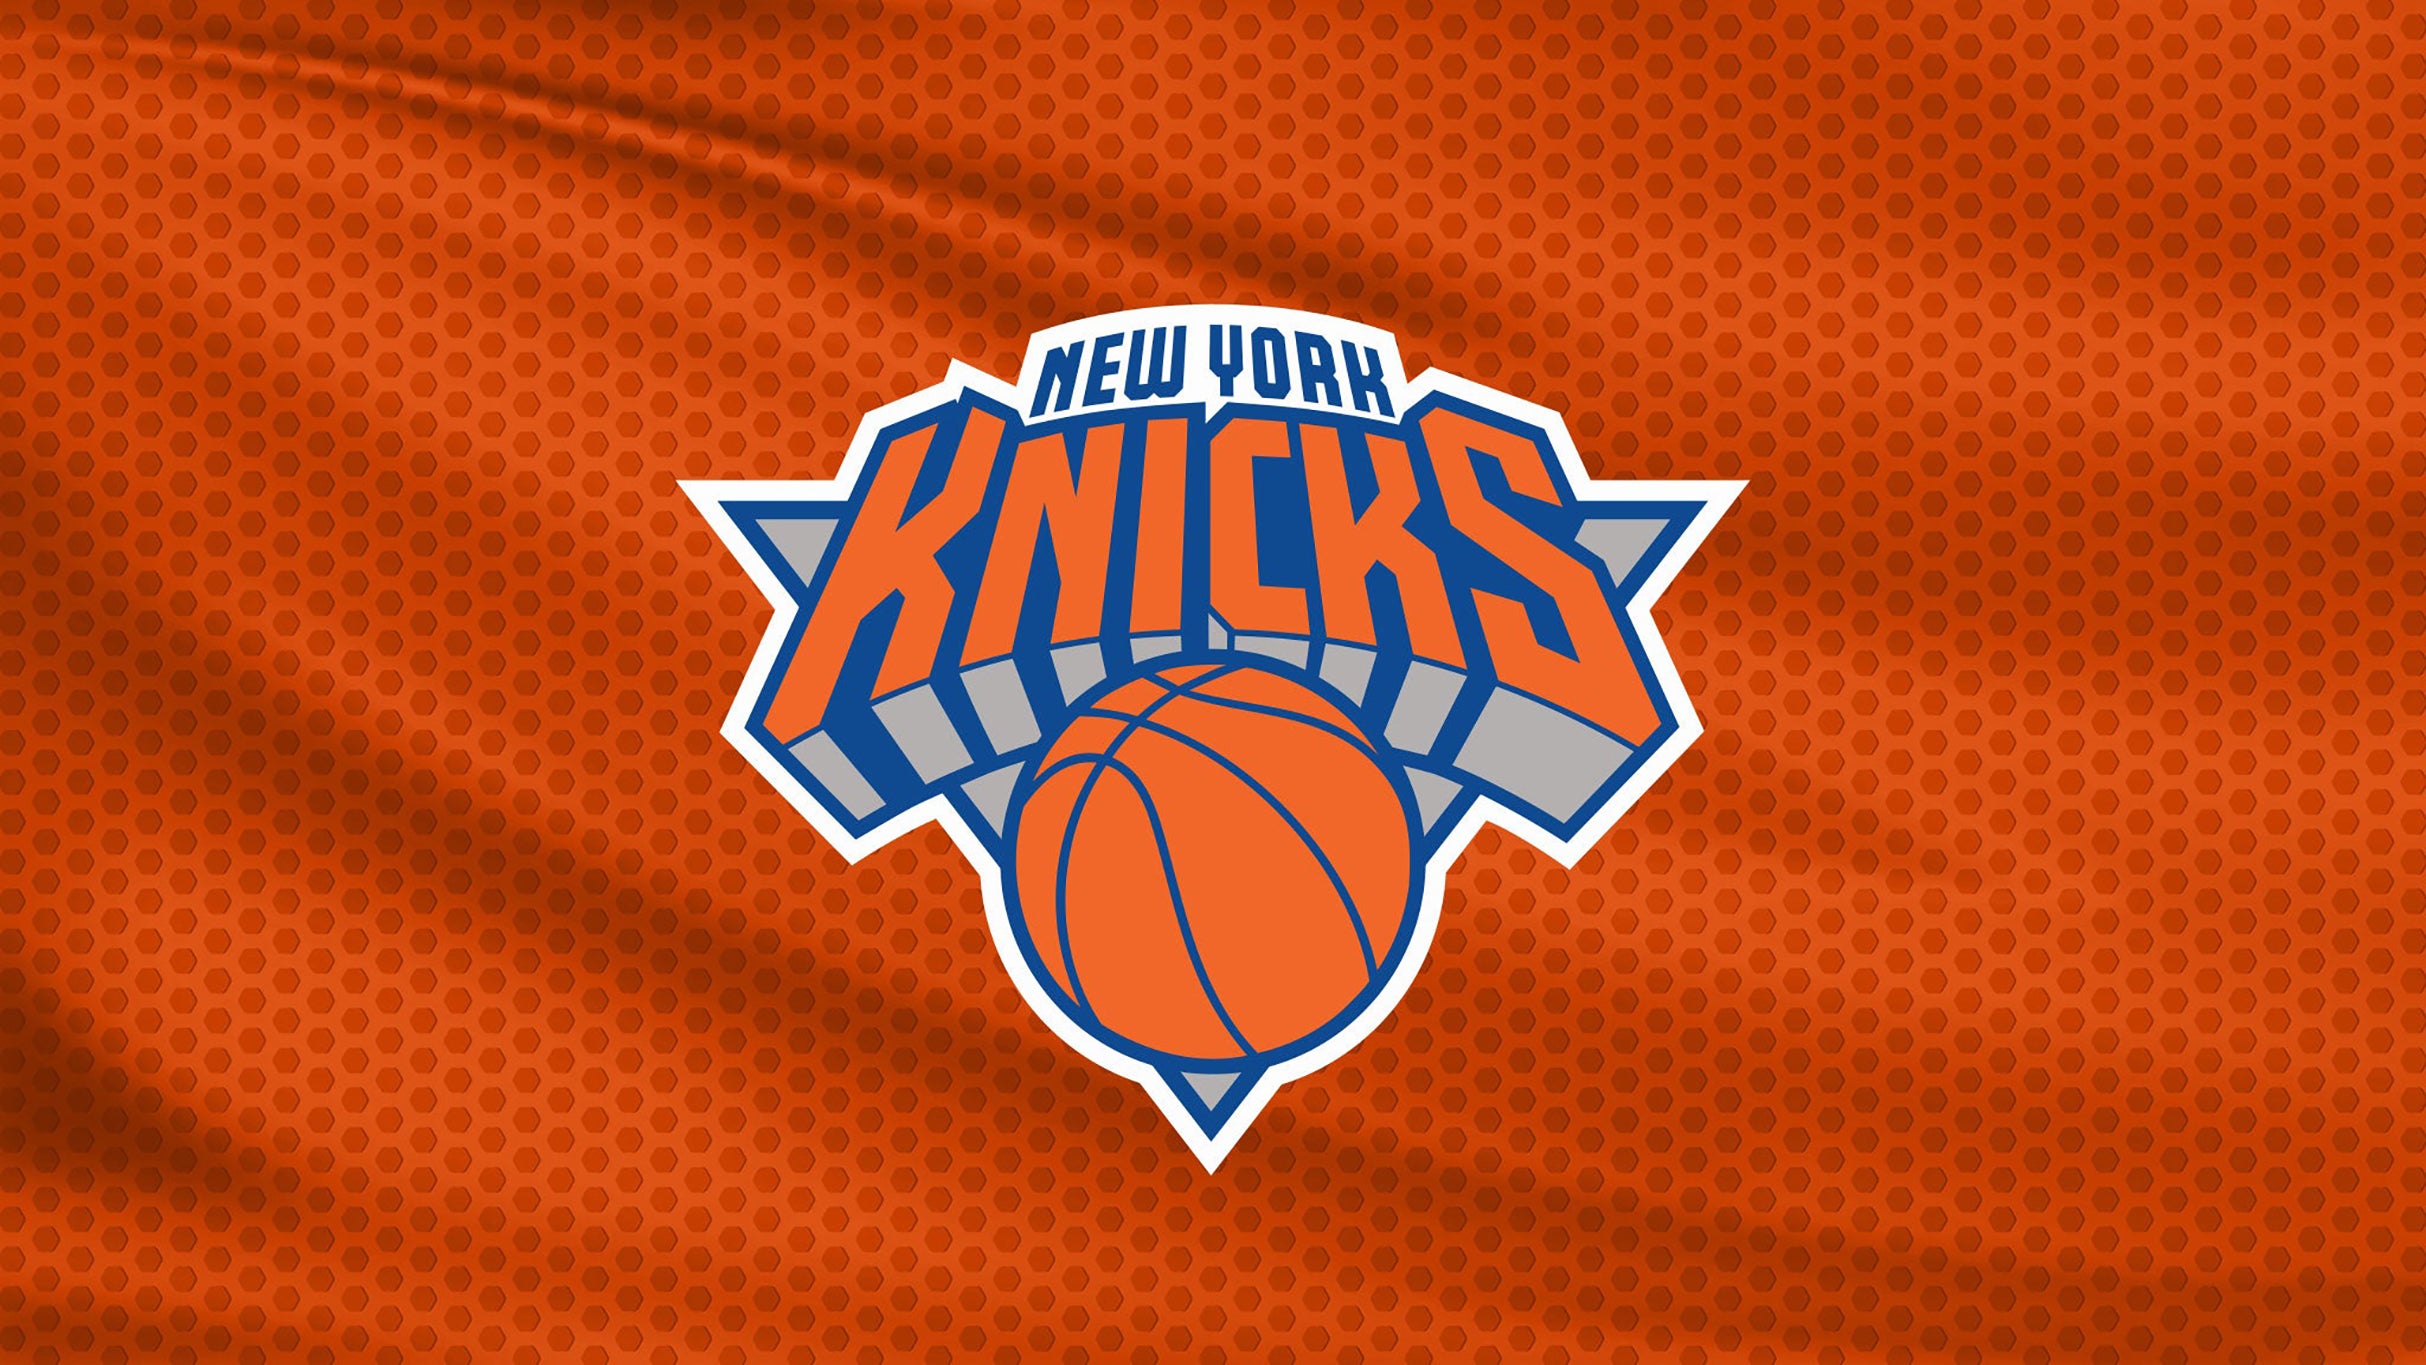 East Conf Finals: TBD at Knicks Rd 3 Hm Gm 4 in New York promo photo for MSG Fan-First presale offer code